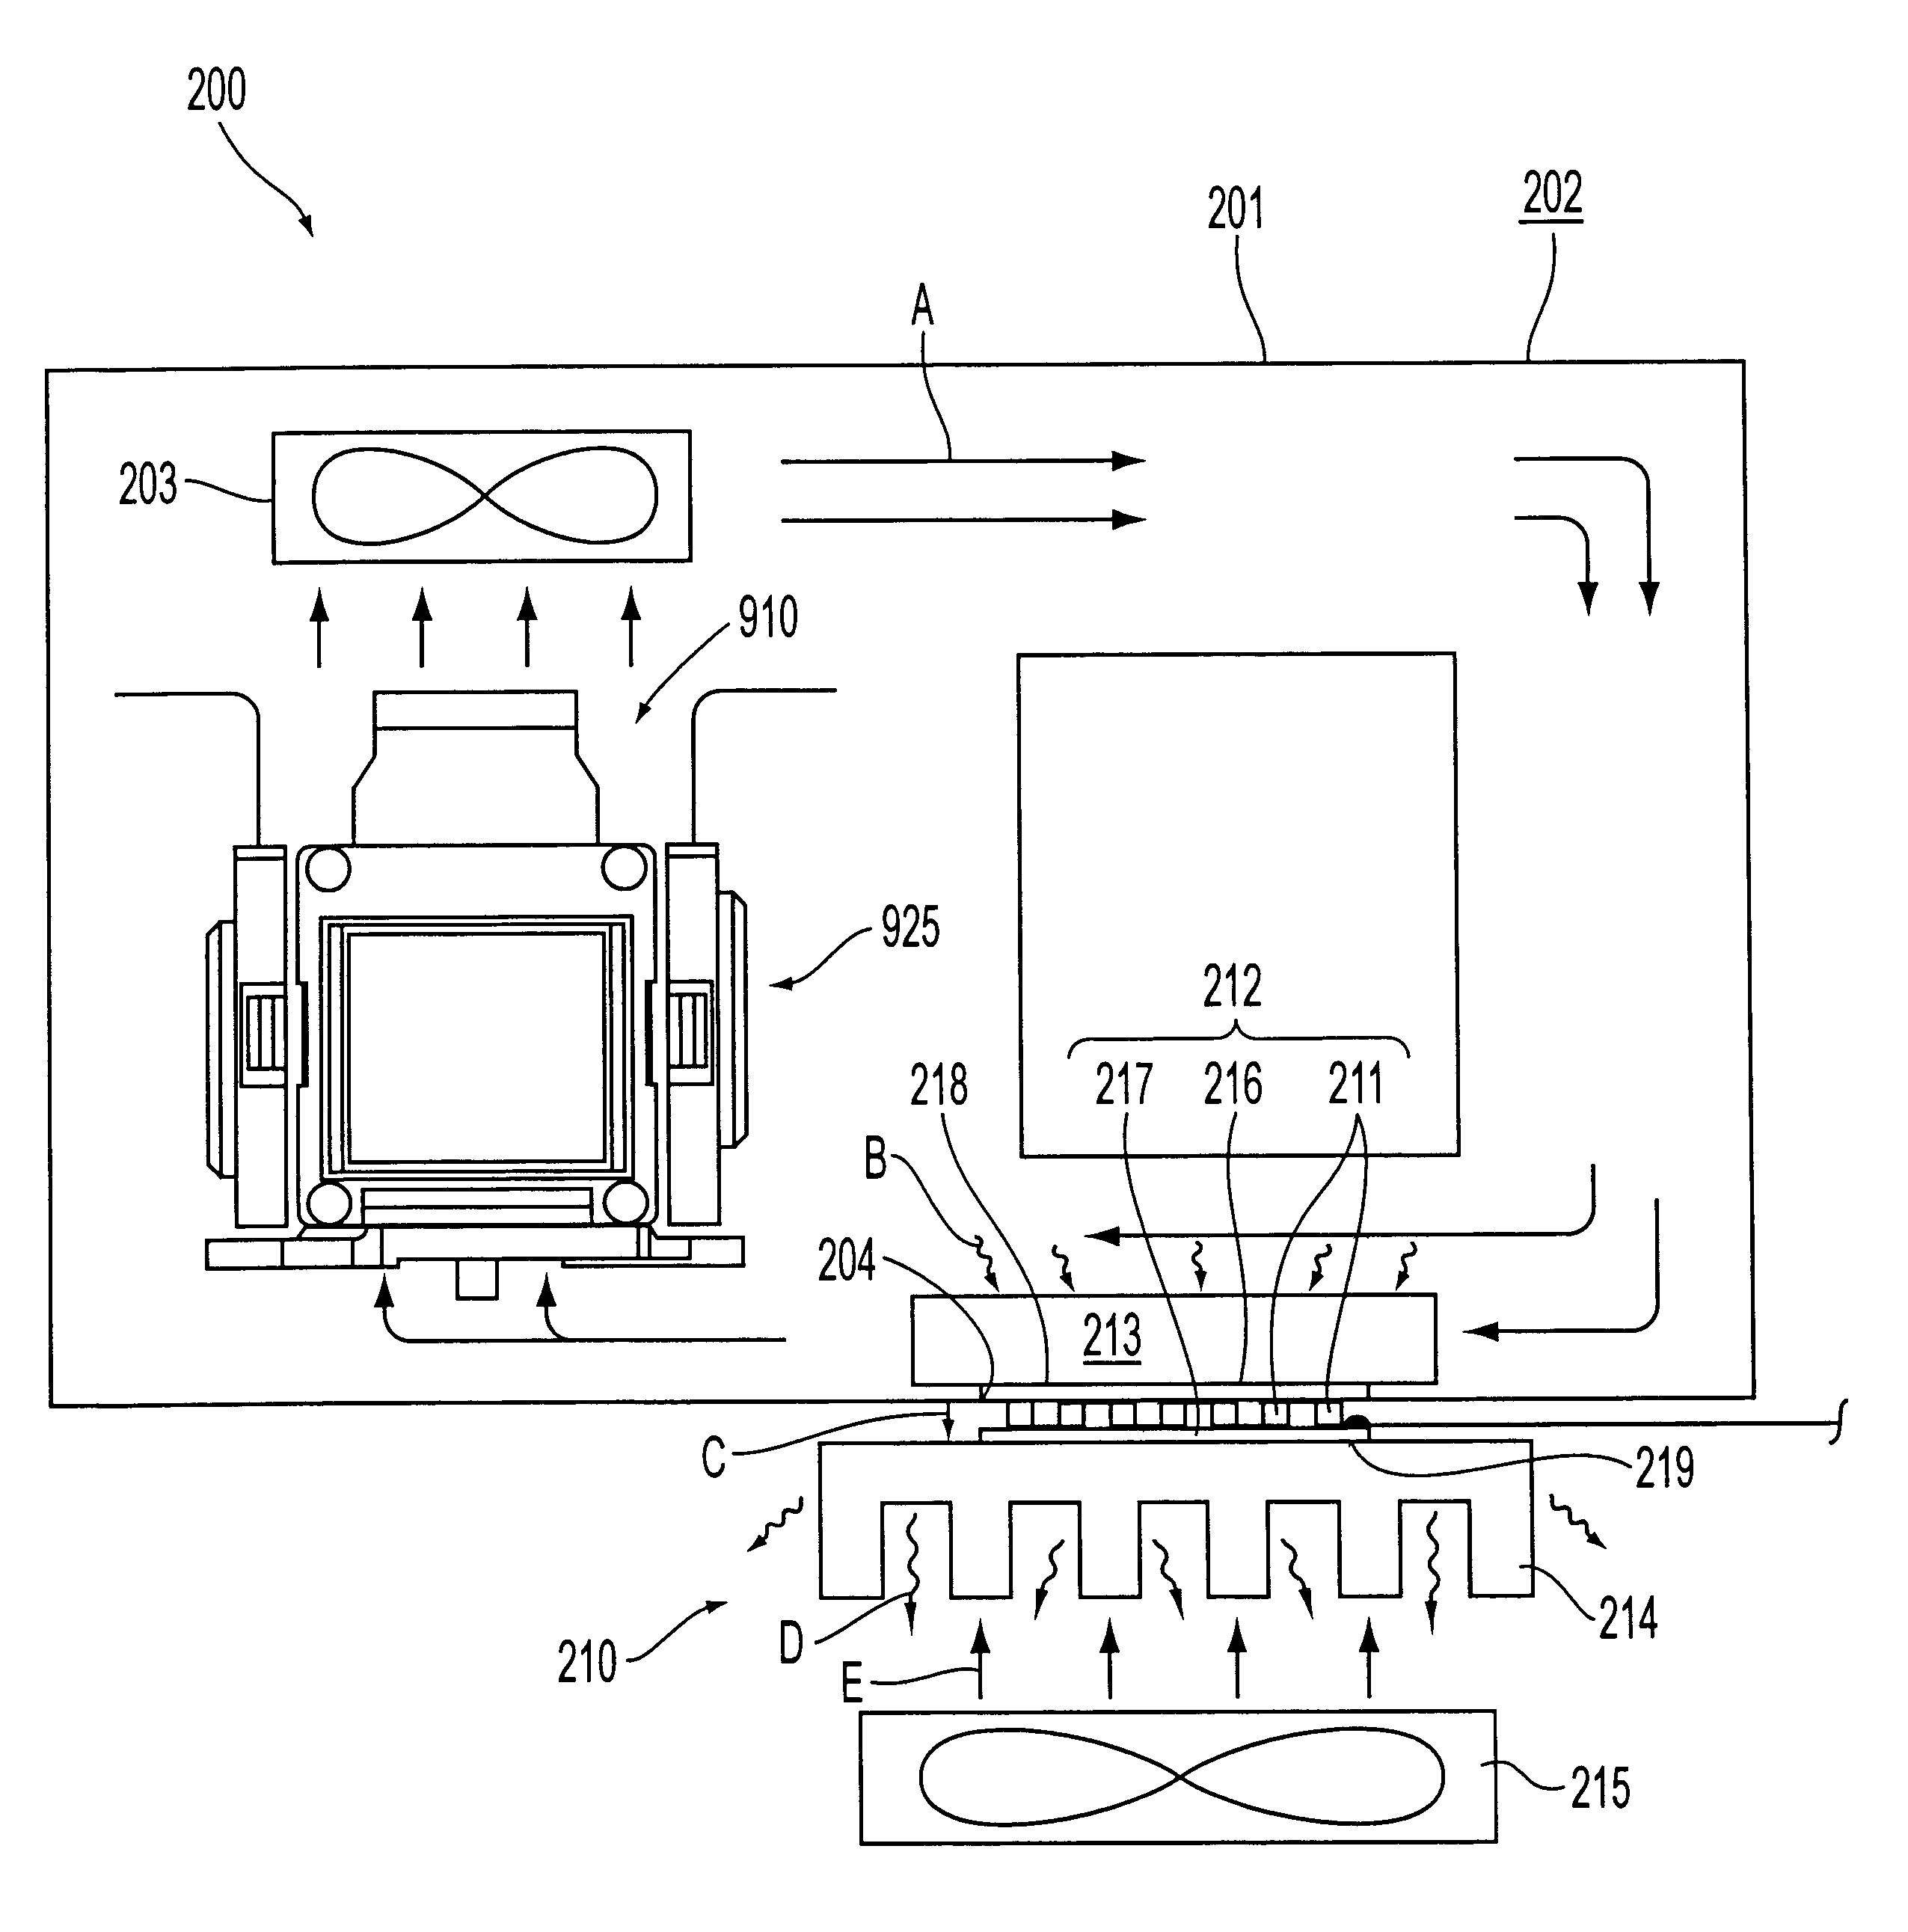 Optical projector with image enlarging and projecting capability and heat insulating and cooling means